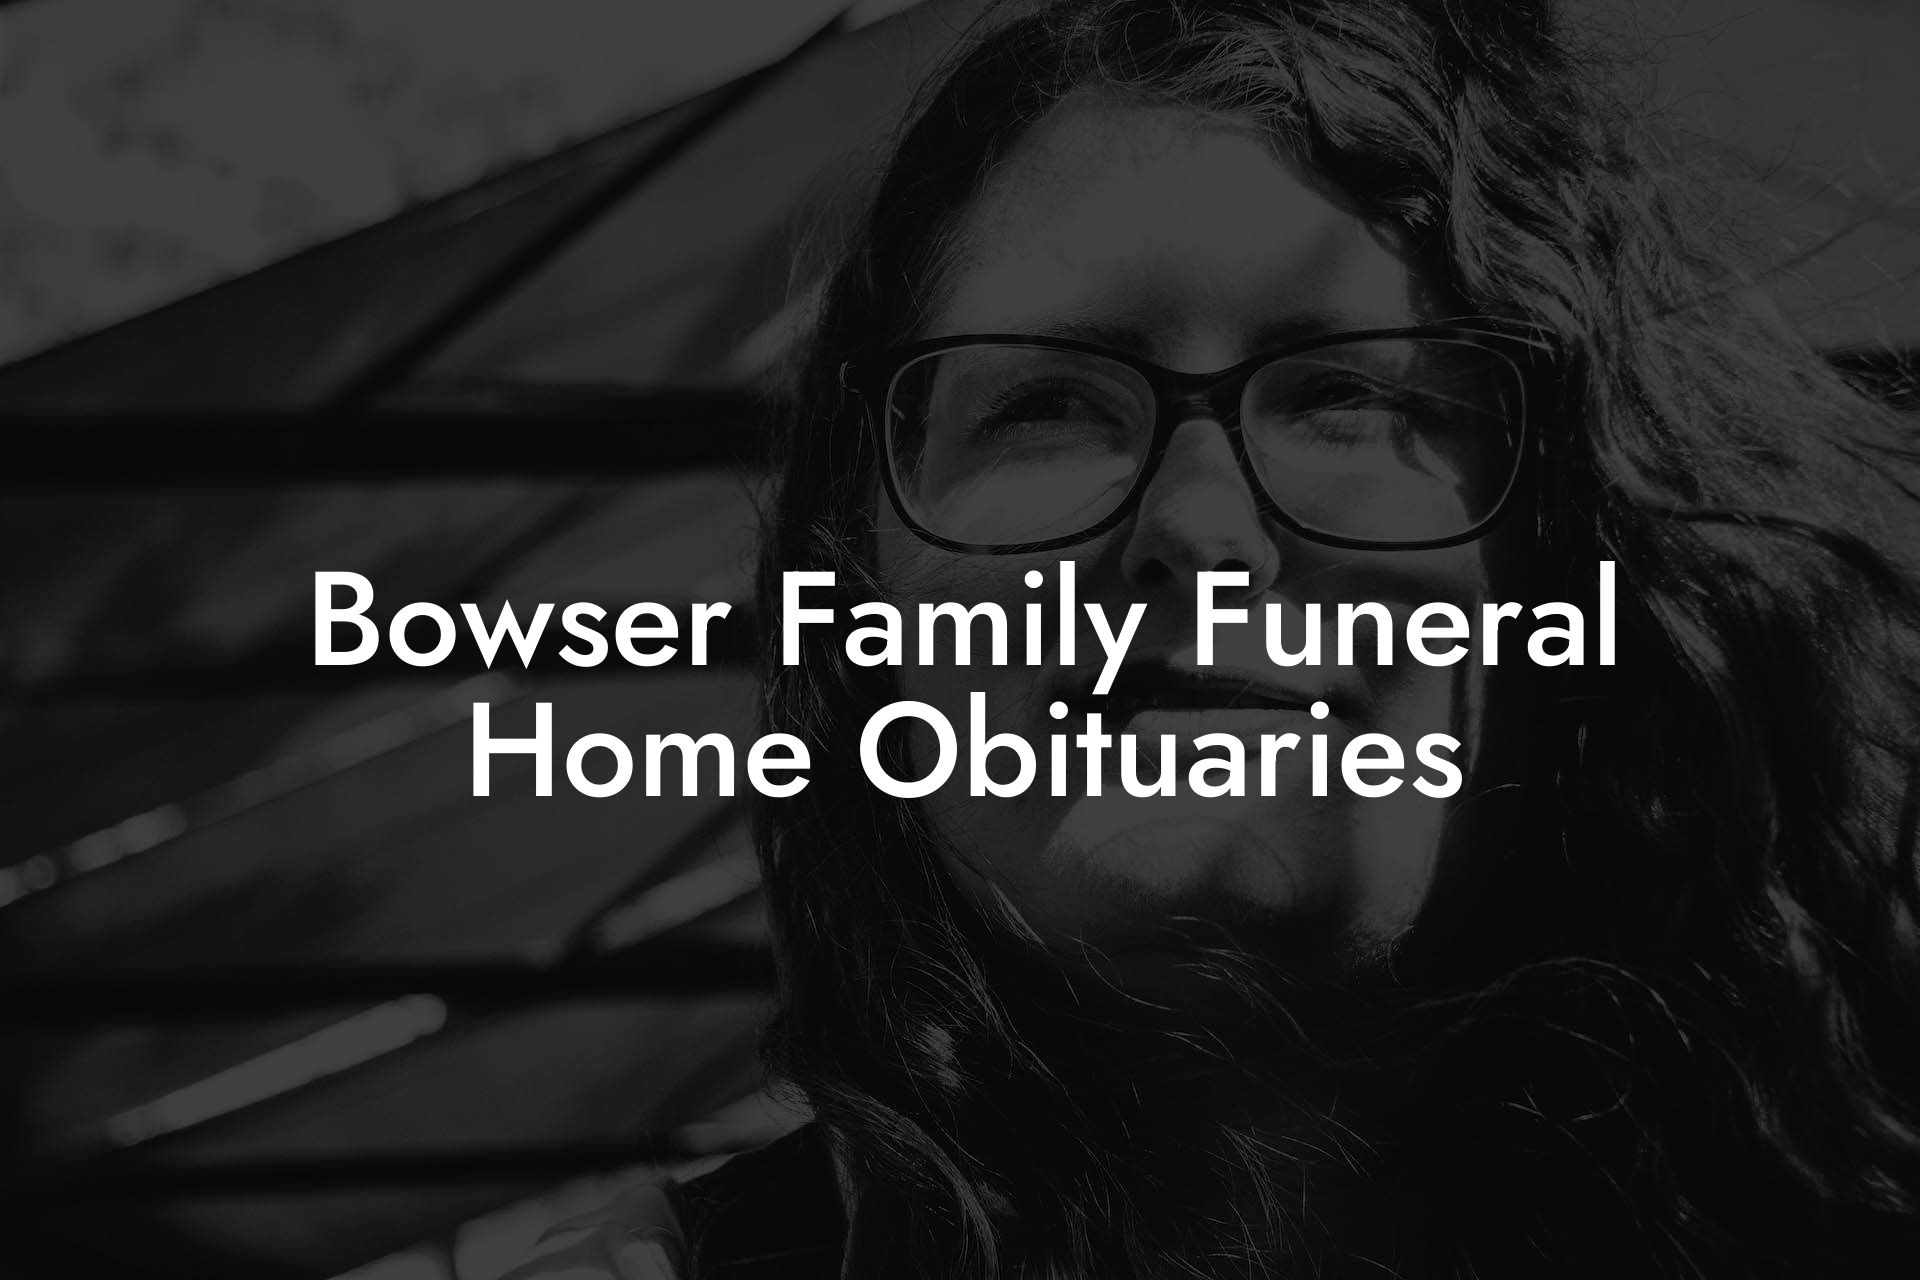 Bowser Family Funeral Home Obituaries